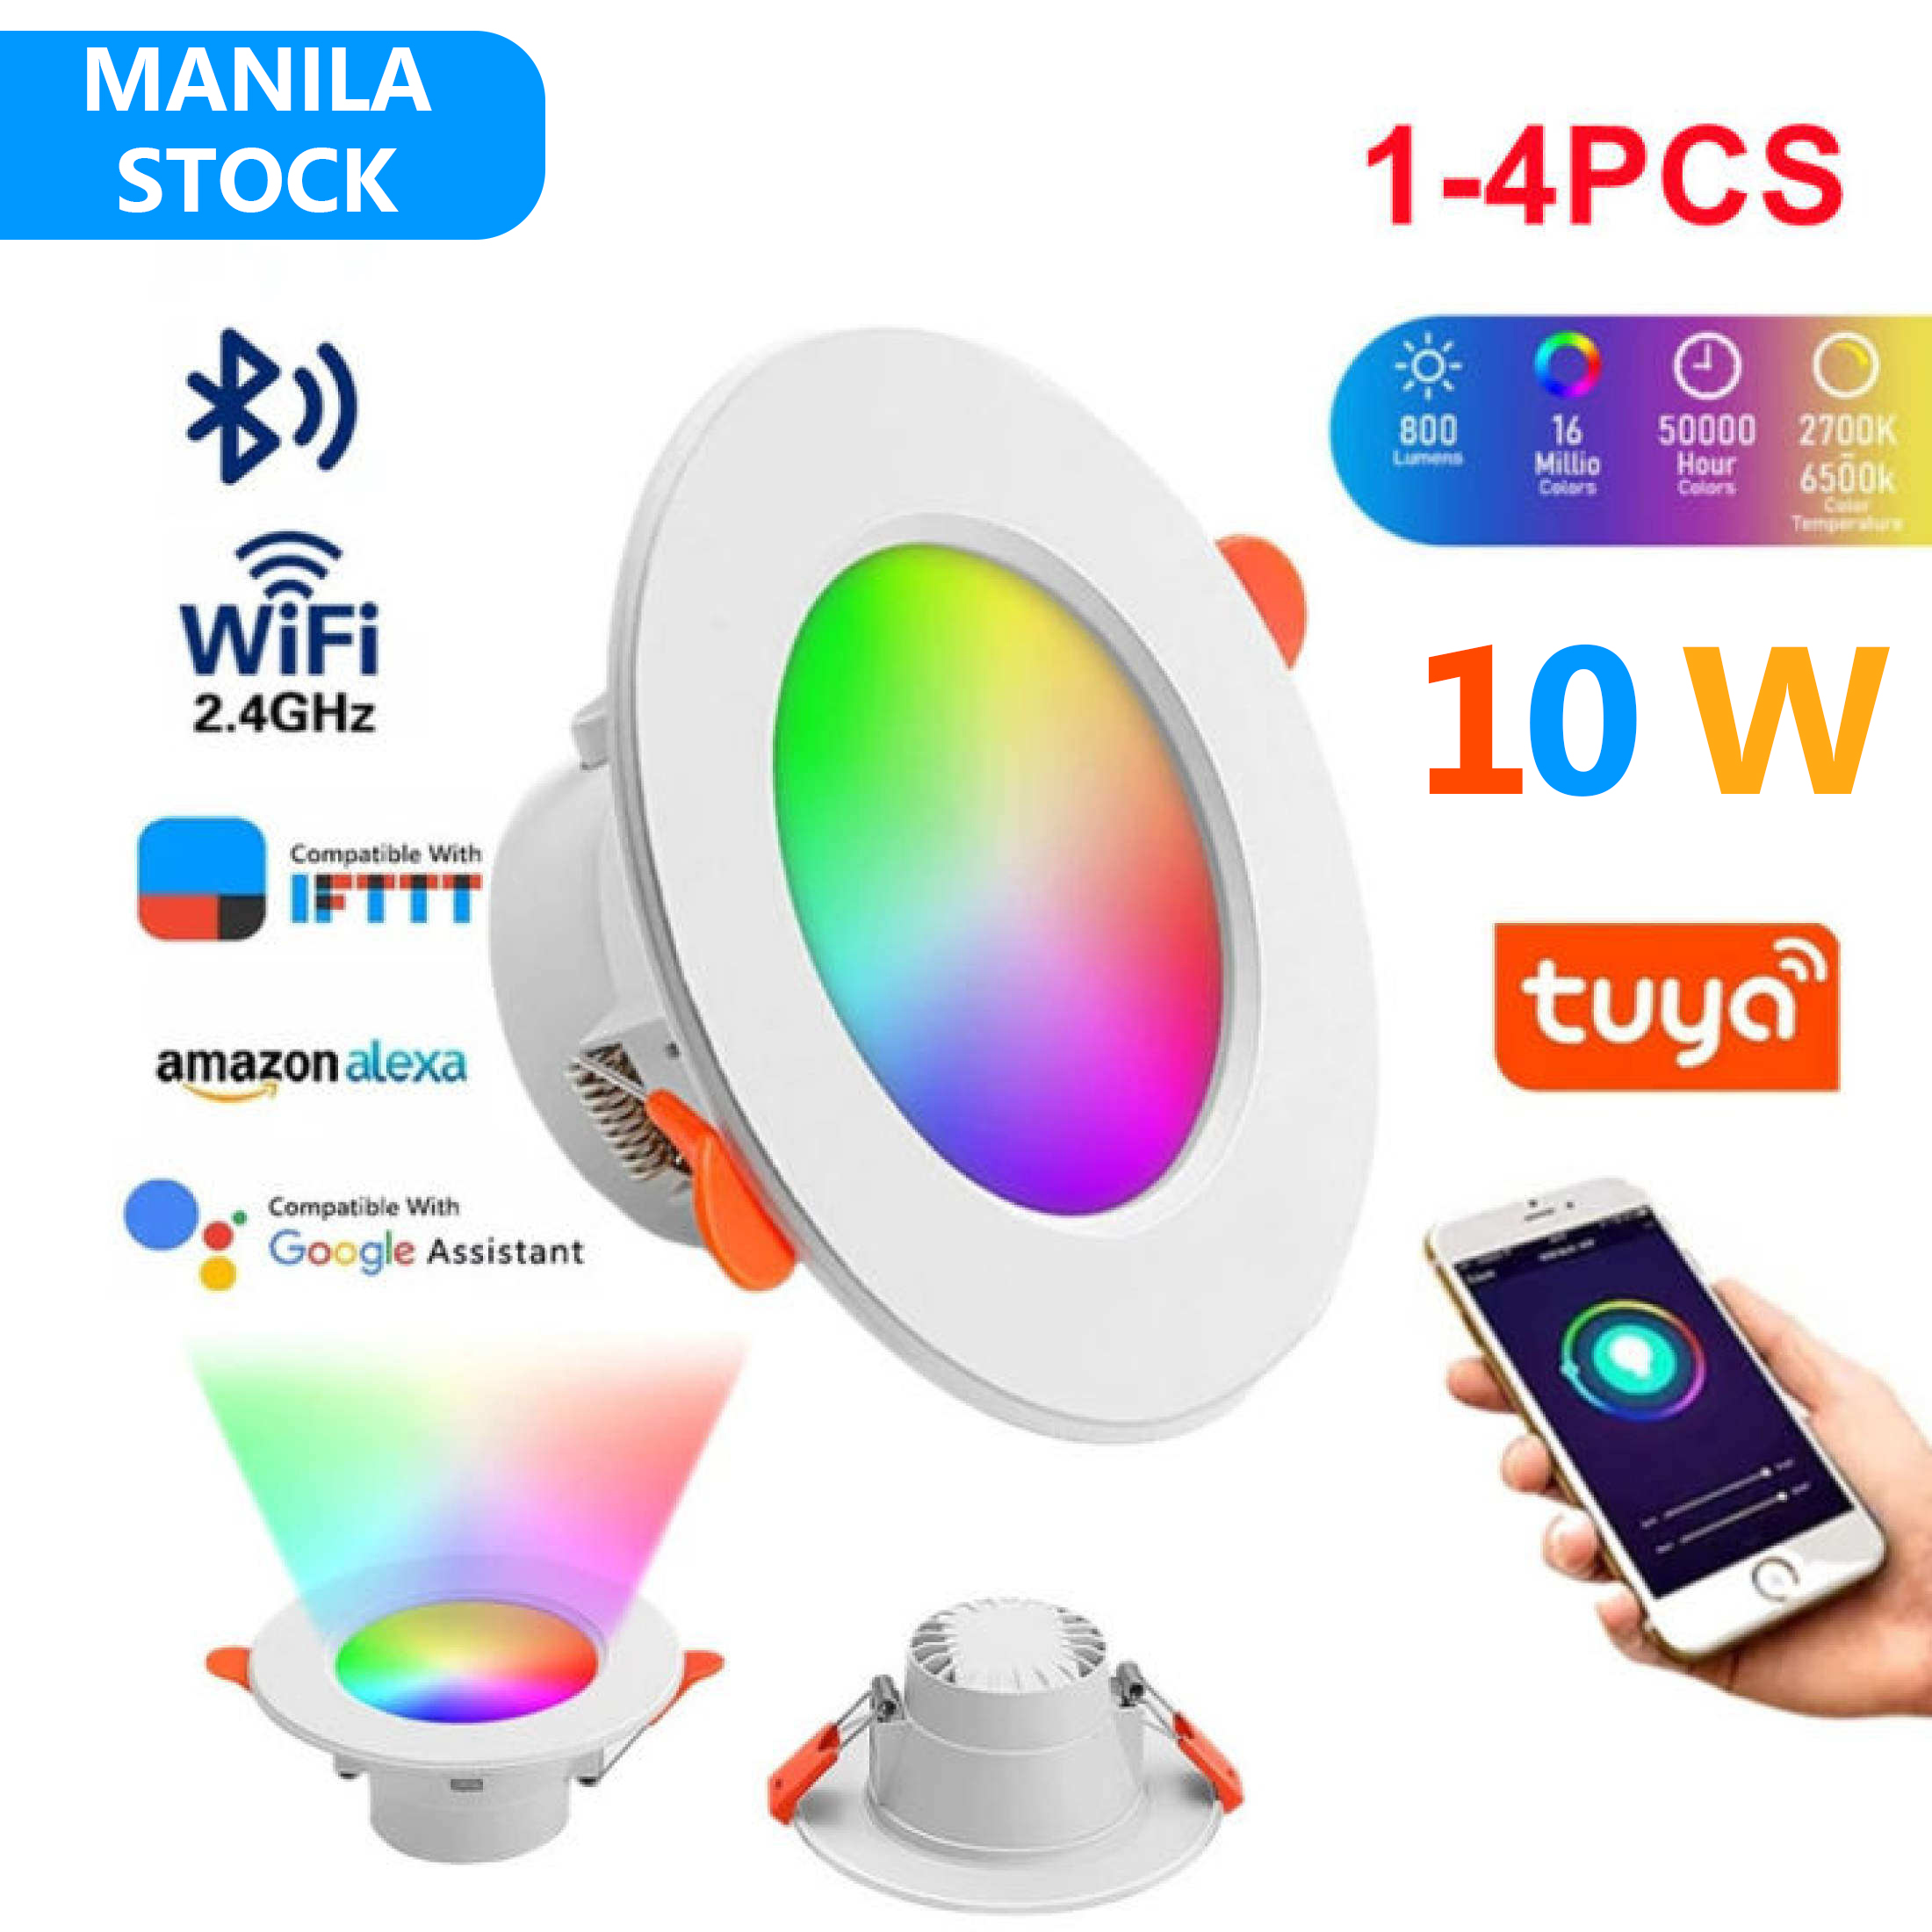 LED Downlight 10W Smart Ceiling Light RGB Dimmable Recessed Led Spot Lamp  RGB+CW+WW Smart Lamp Work With Alexa Google Home